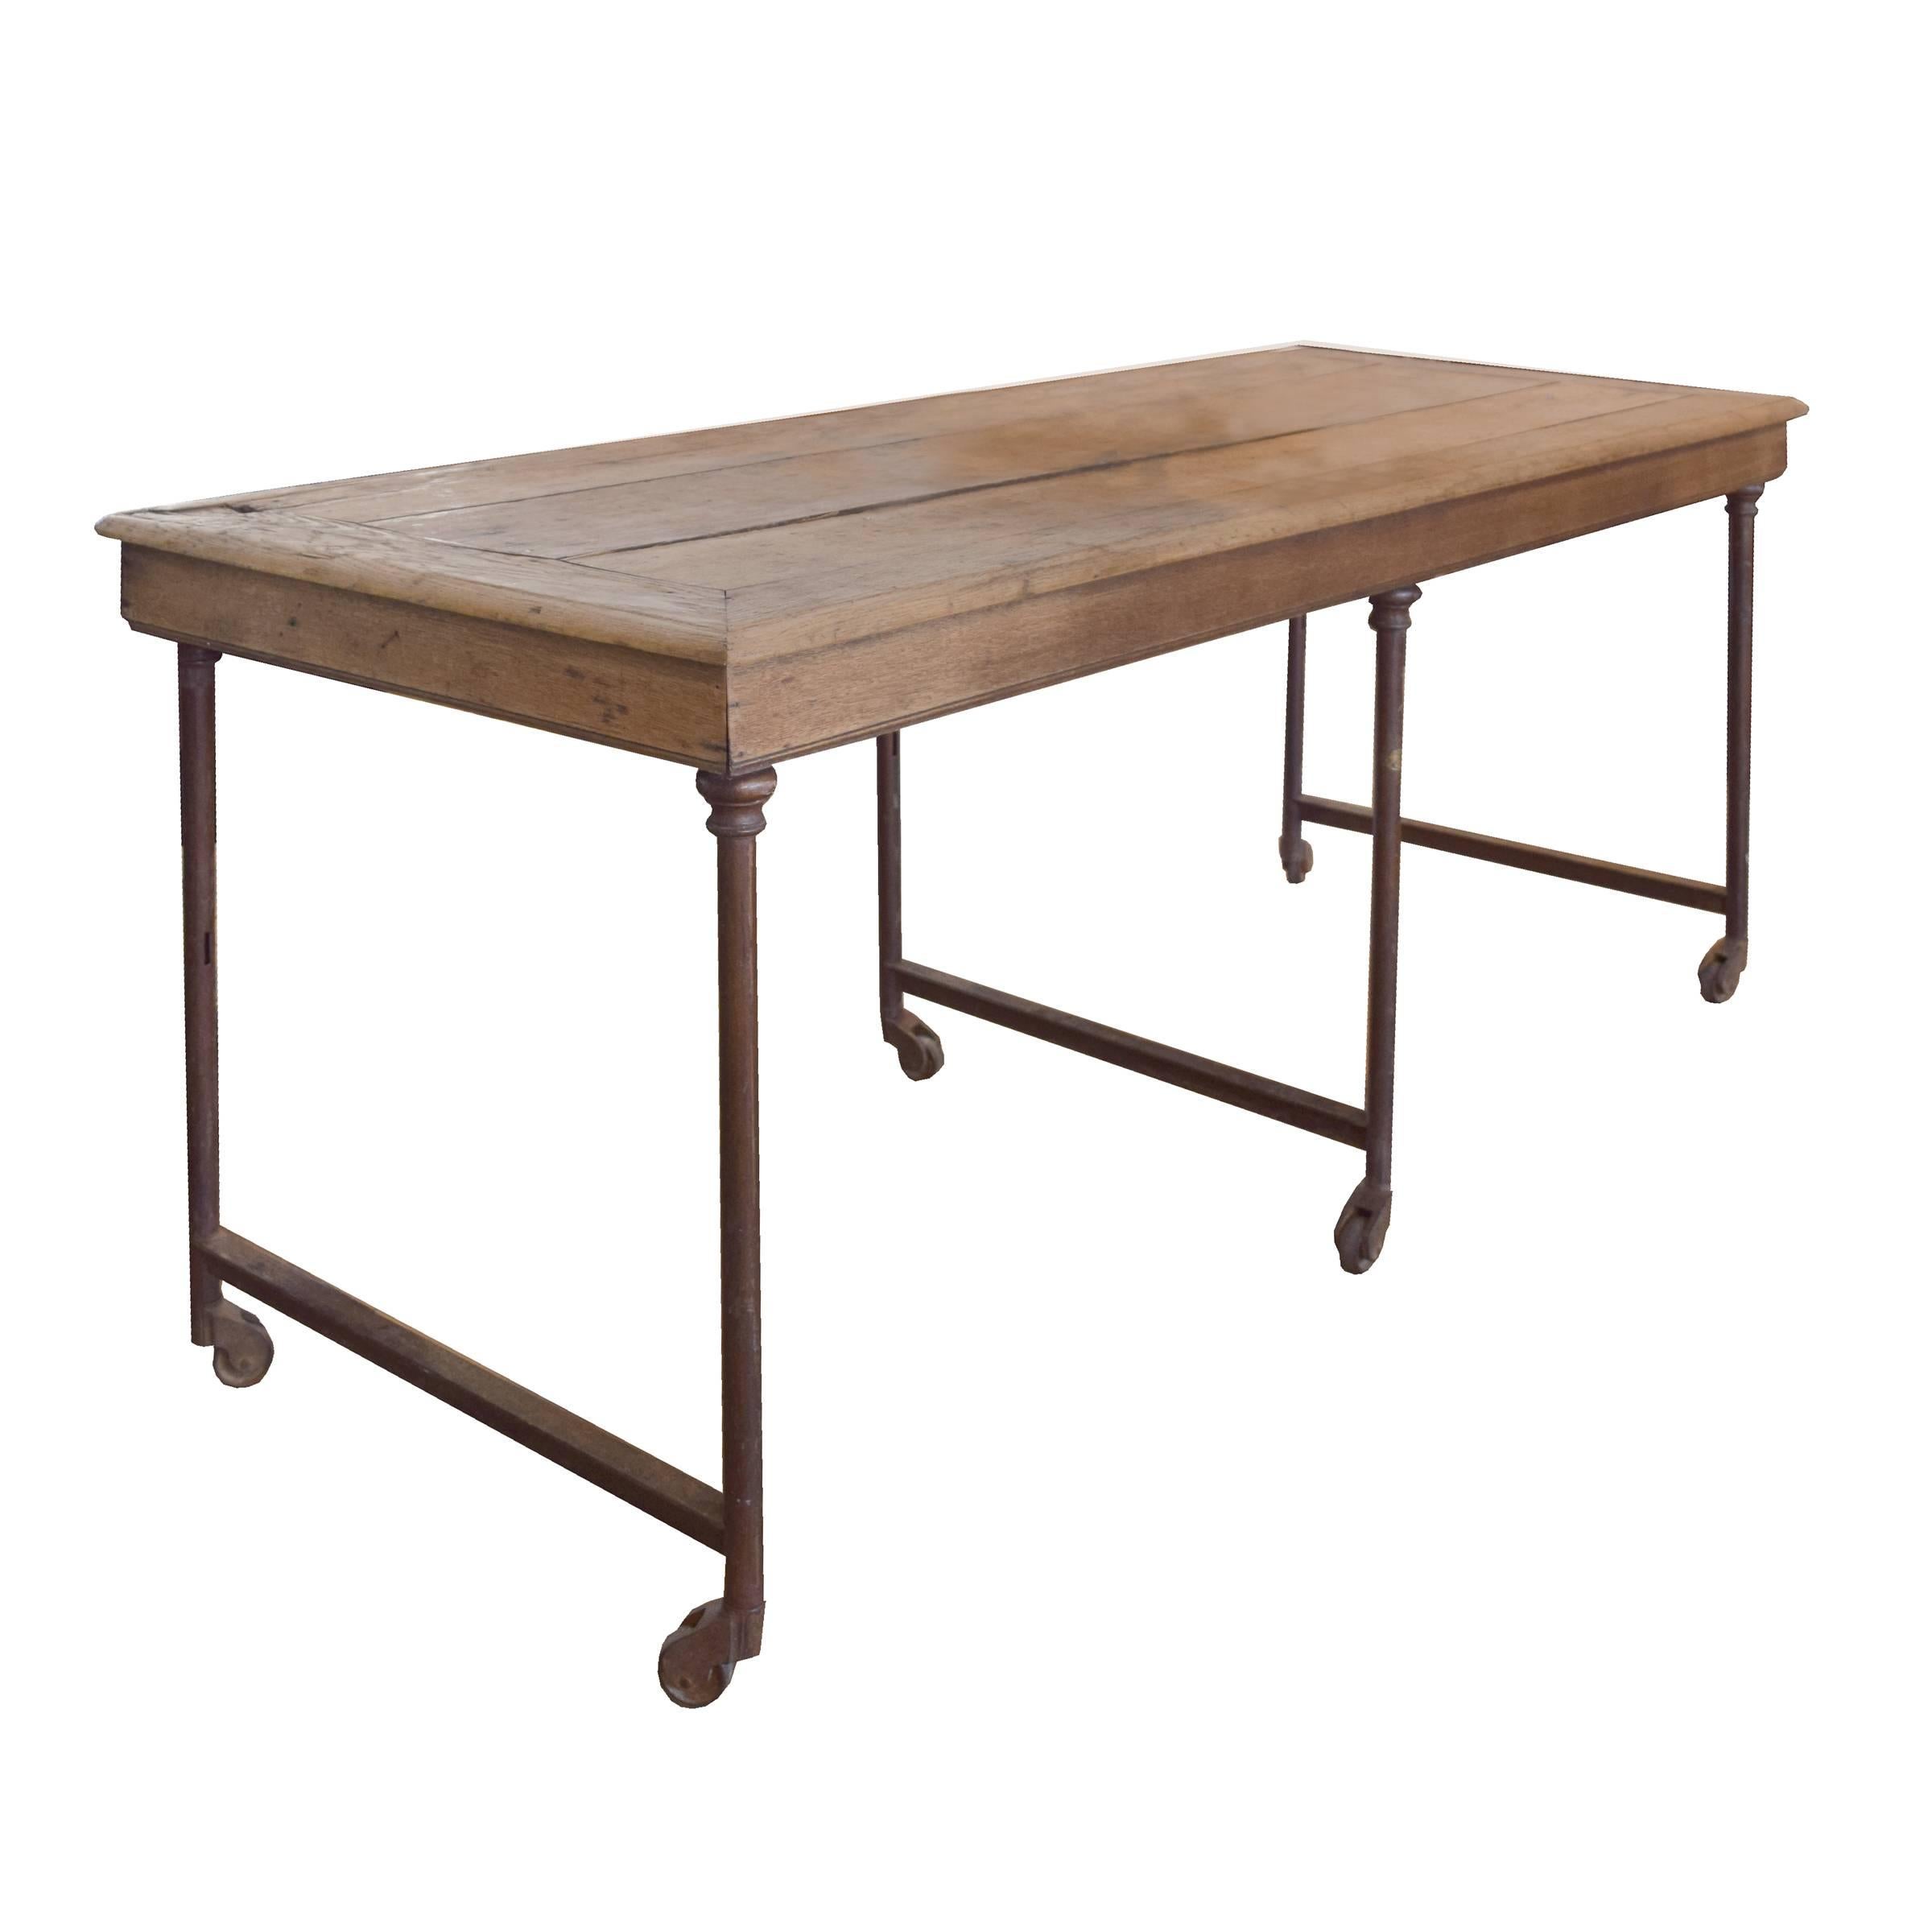 French Théodore Scherf Oak and Metal Table